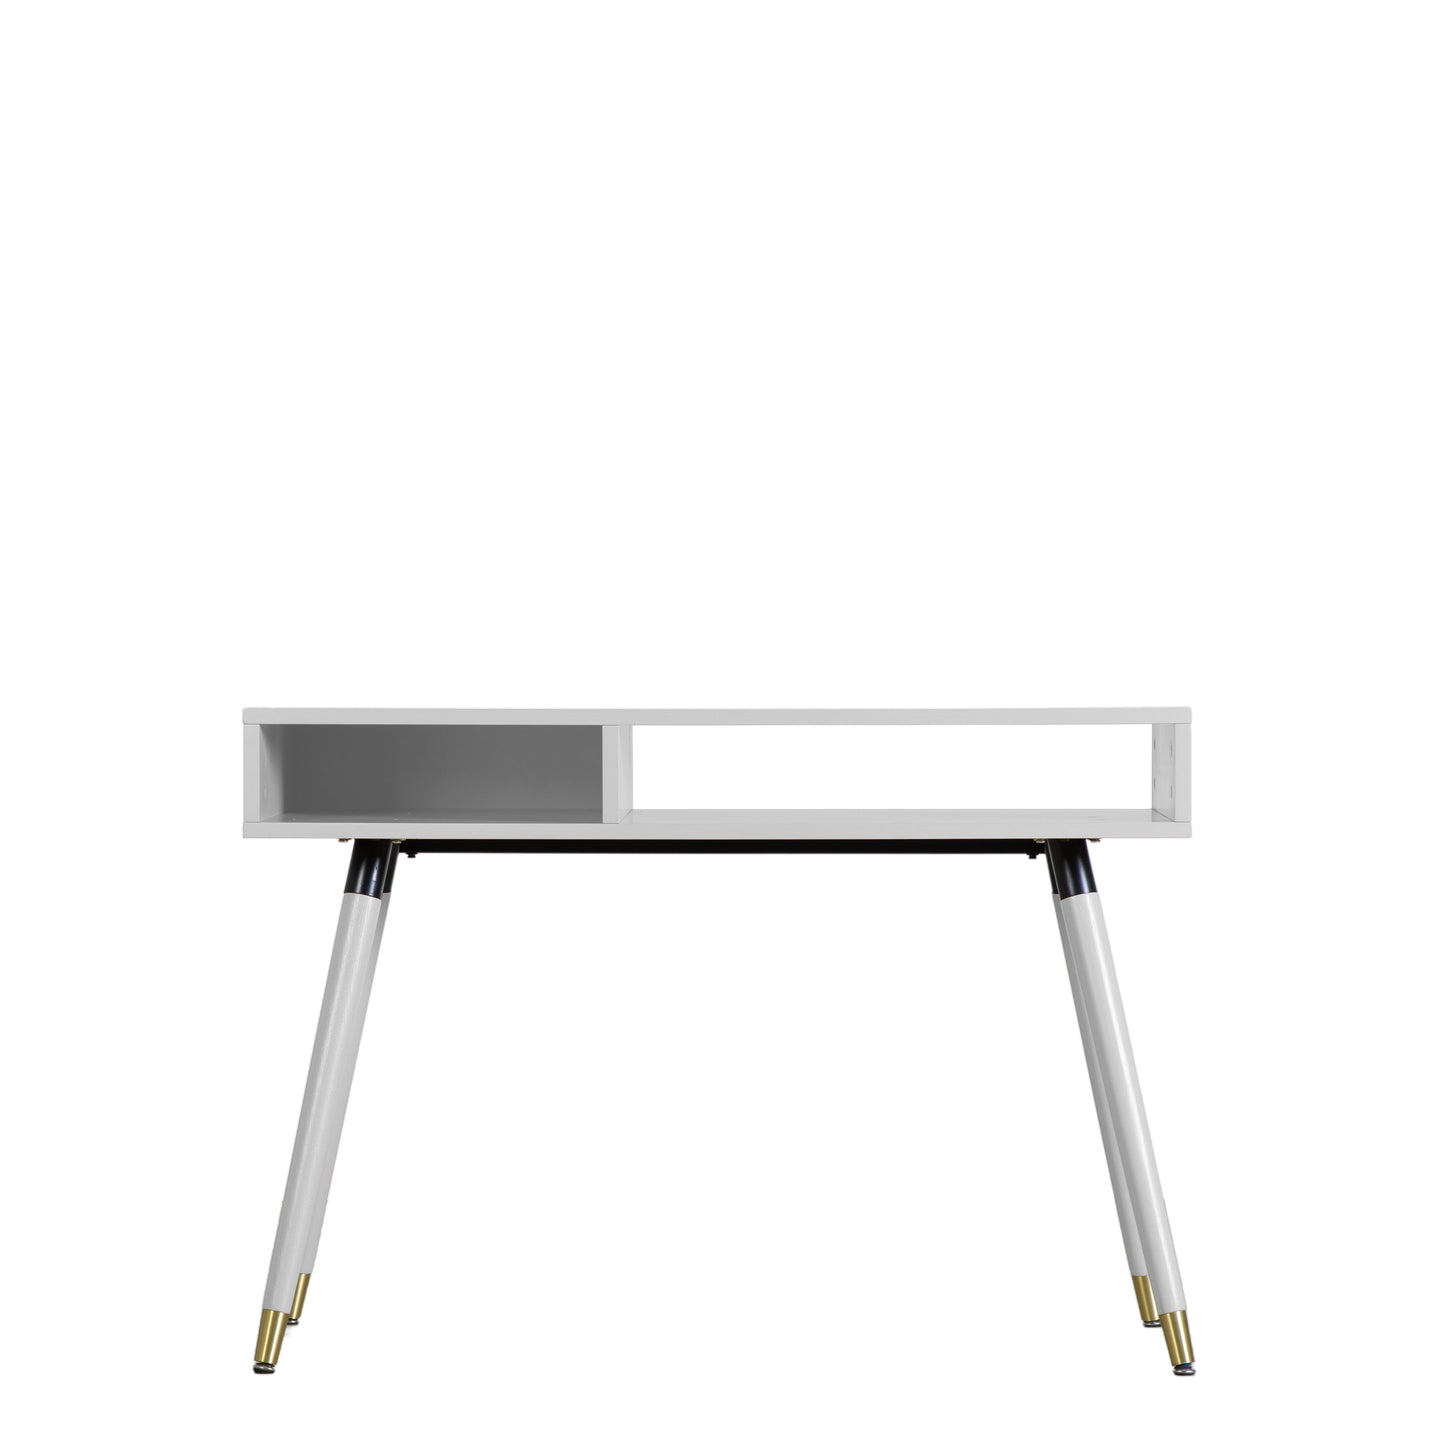 A Thurlestone Console Table White 1100x450x770mm with gold legs on a white background for interior decor or home furniture.